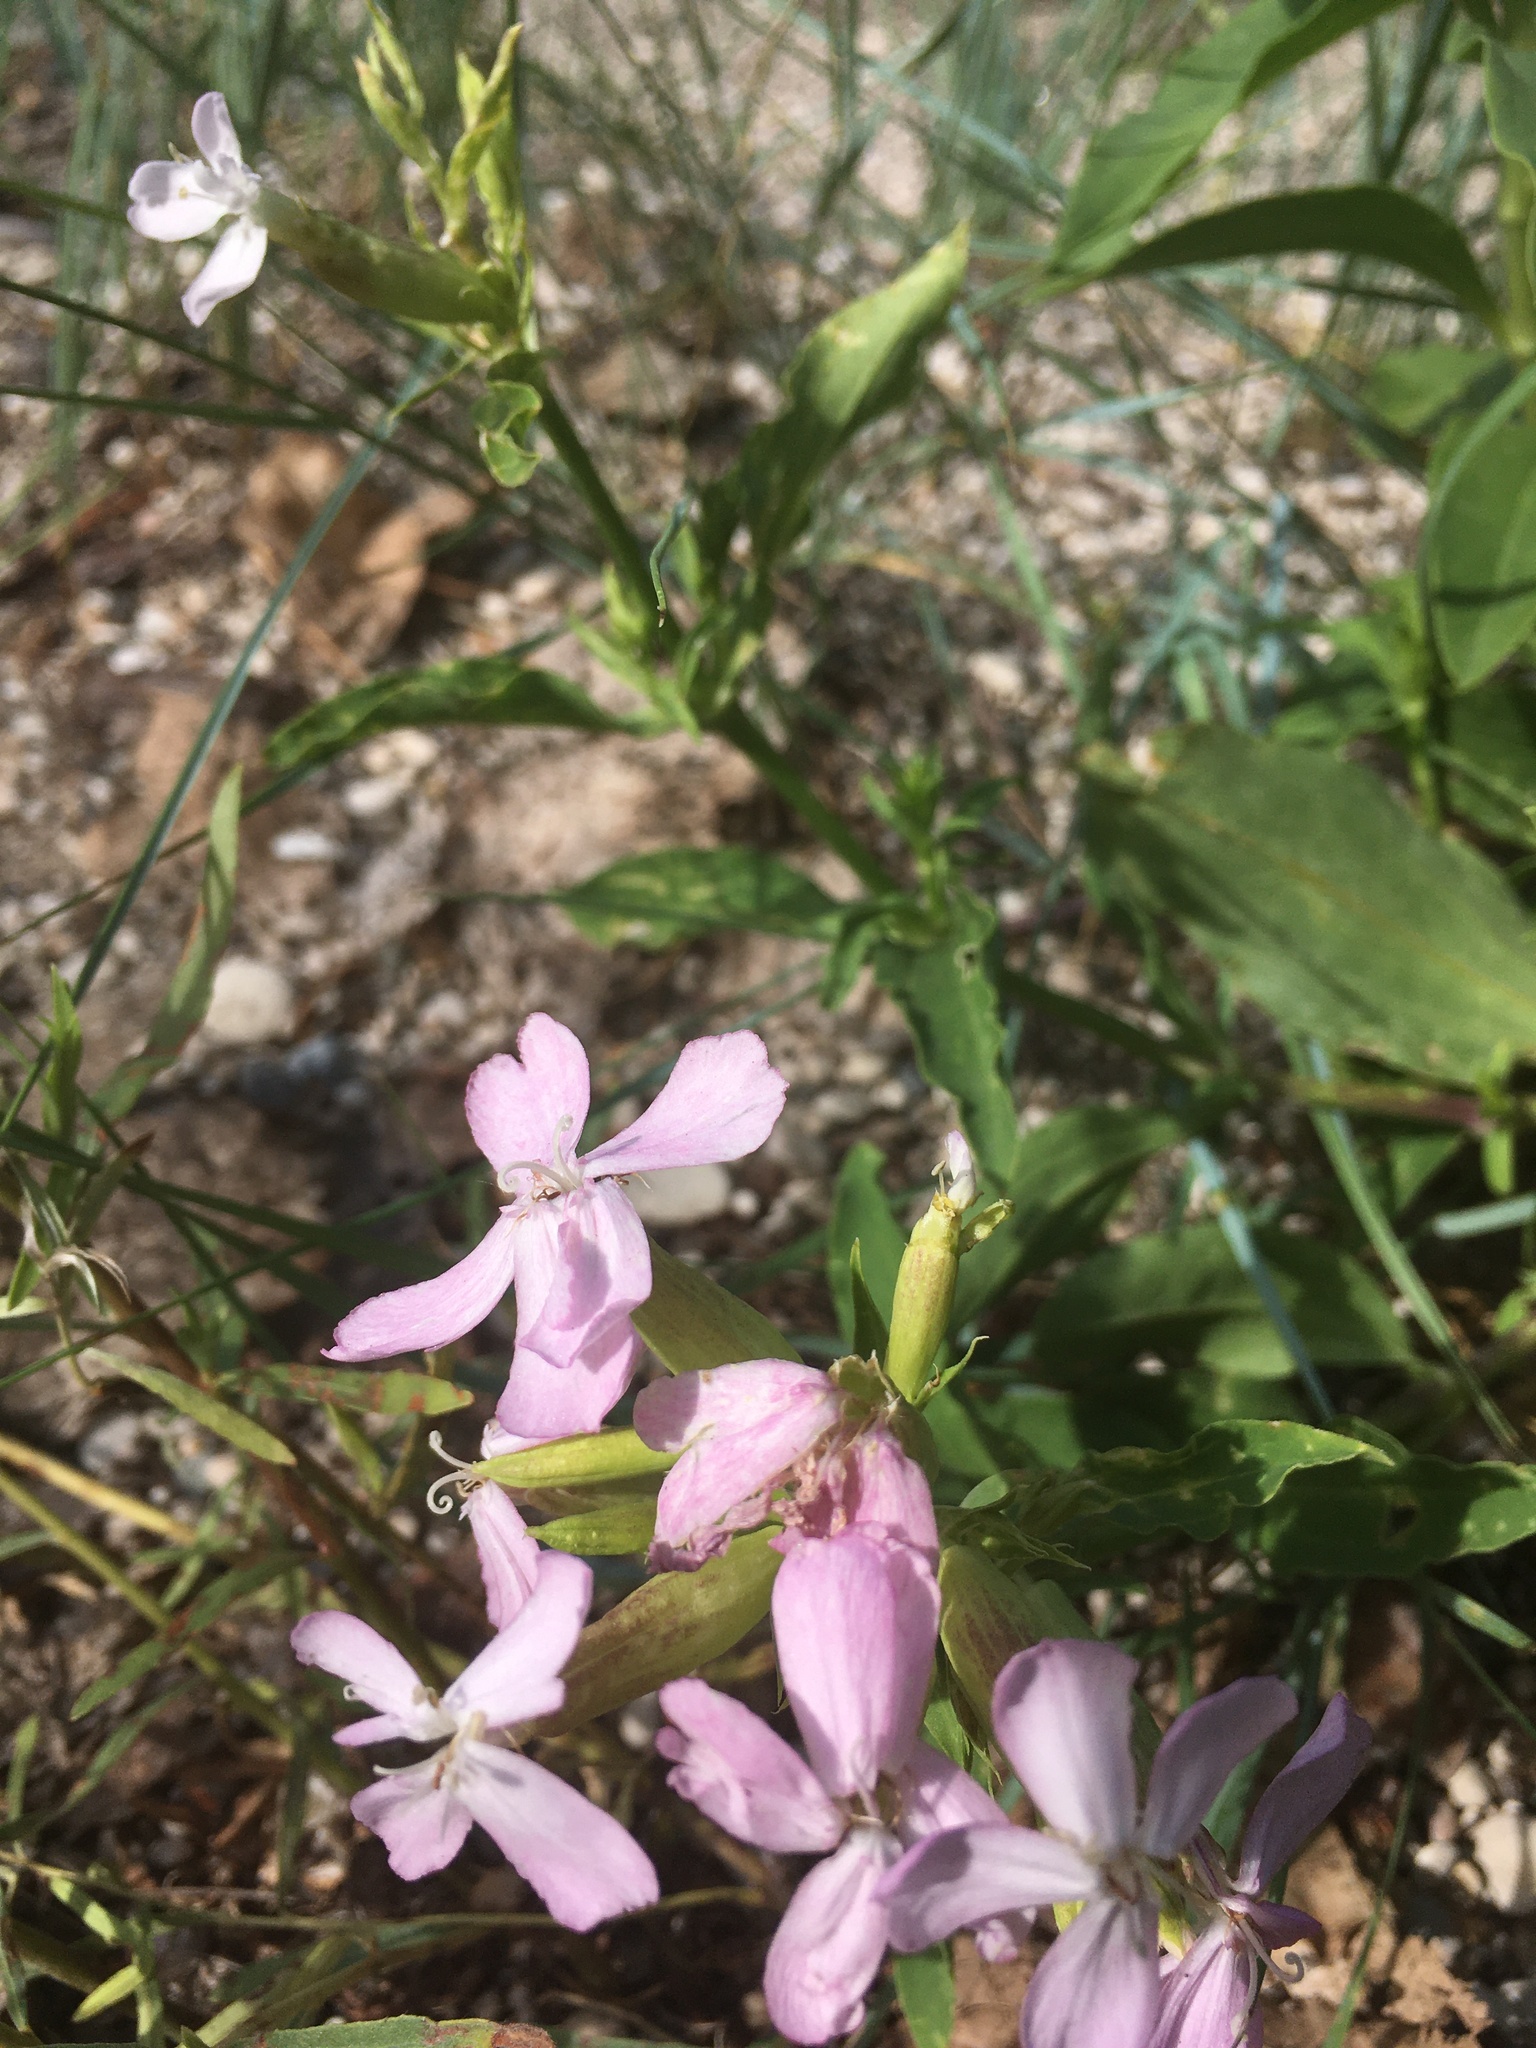 photo of Saponaria officinalis / soapwort found on Lake Manitoba south shore. Photo by Brent Guin via iNaturalist CC BY-NC